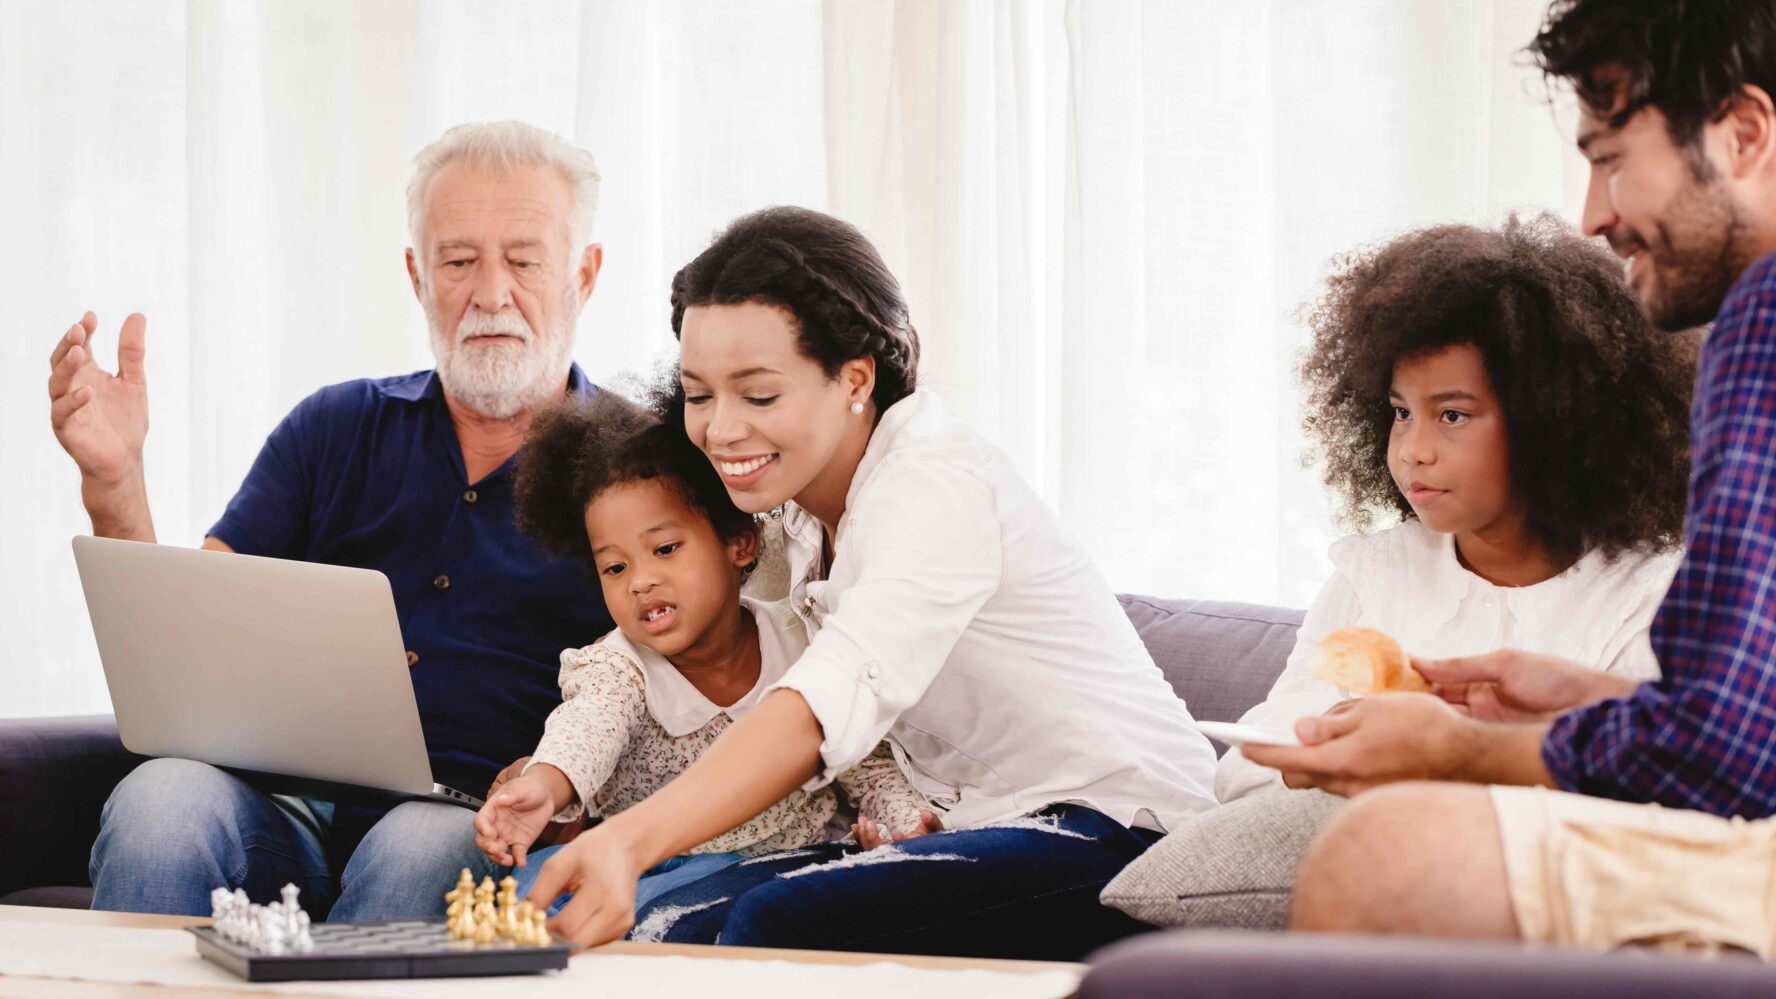 An older man sits on a sofa, with a younger woman and her young daughter. Next to them is a young girl with curly hair and her dad. They are looking at laptop and there is a game of chess on the table.